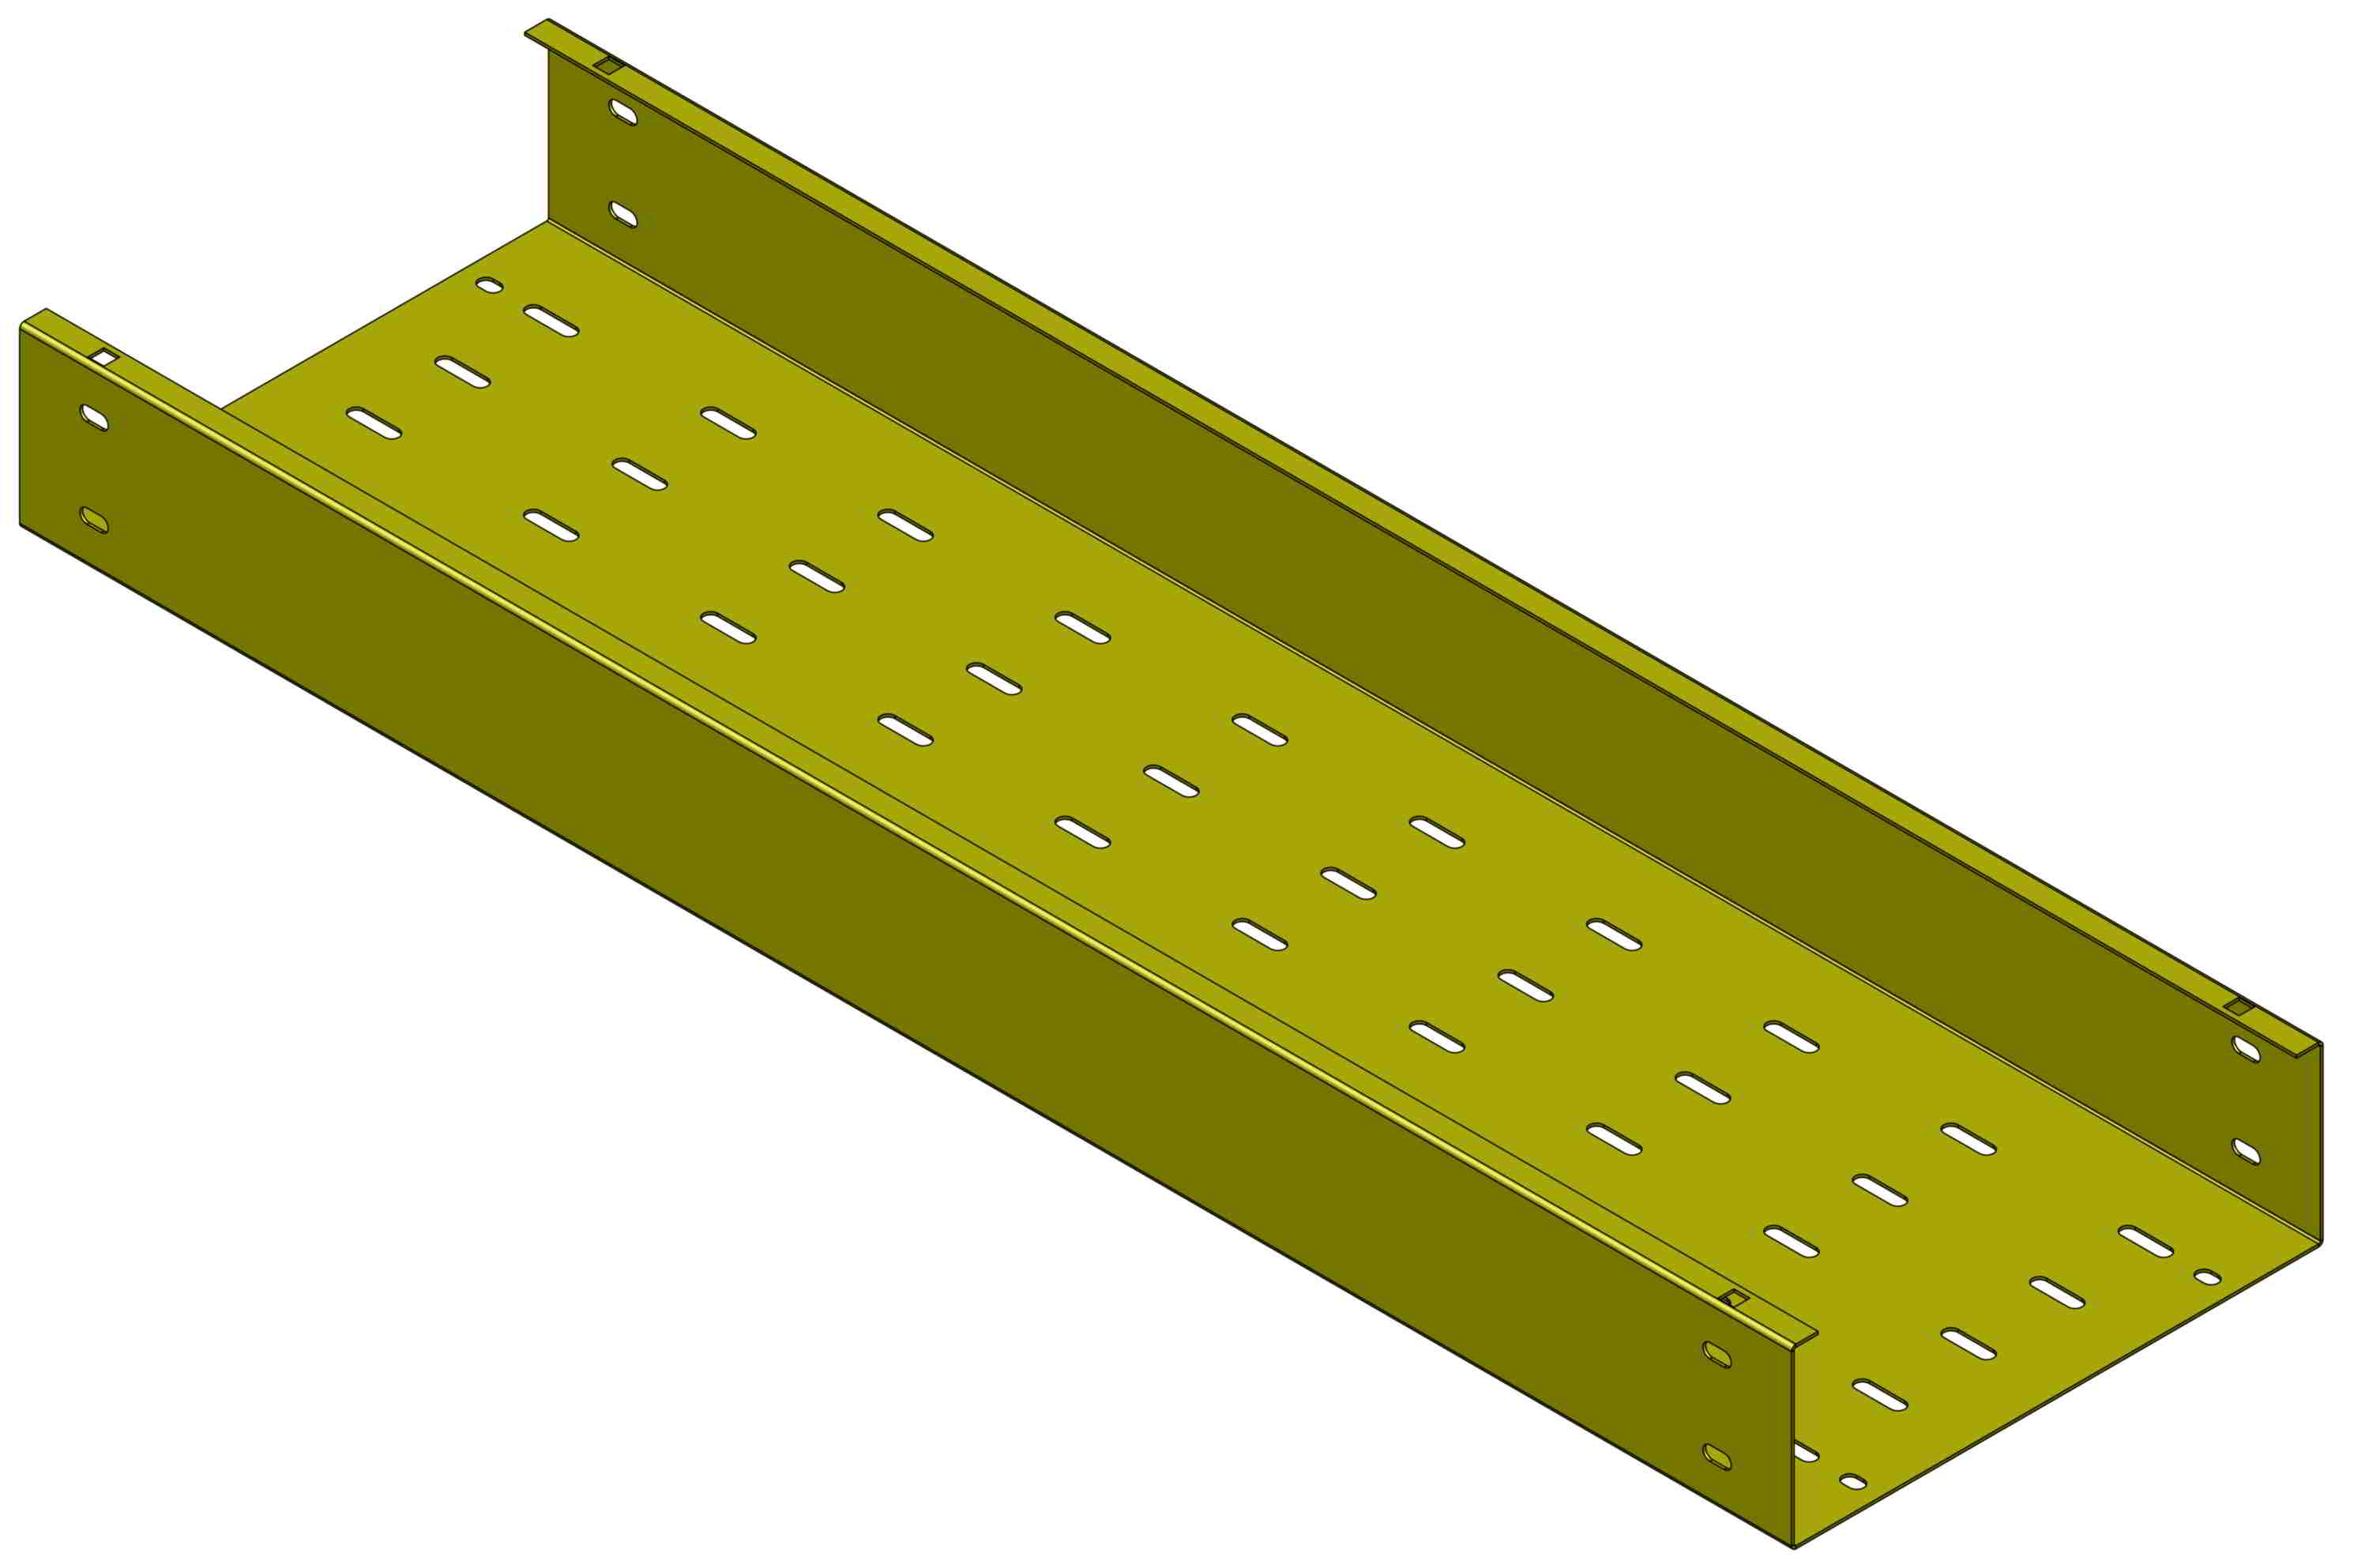 iFlex cable tray